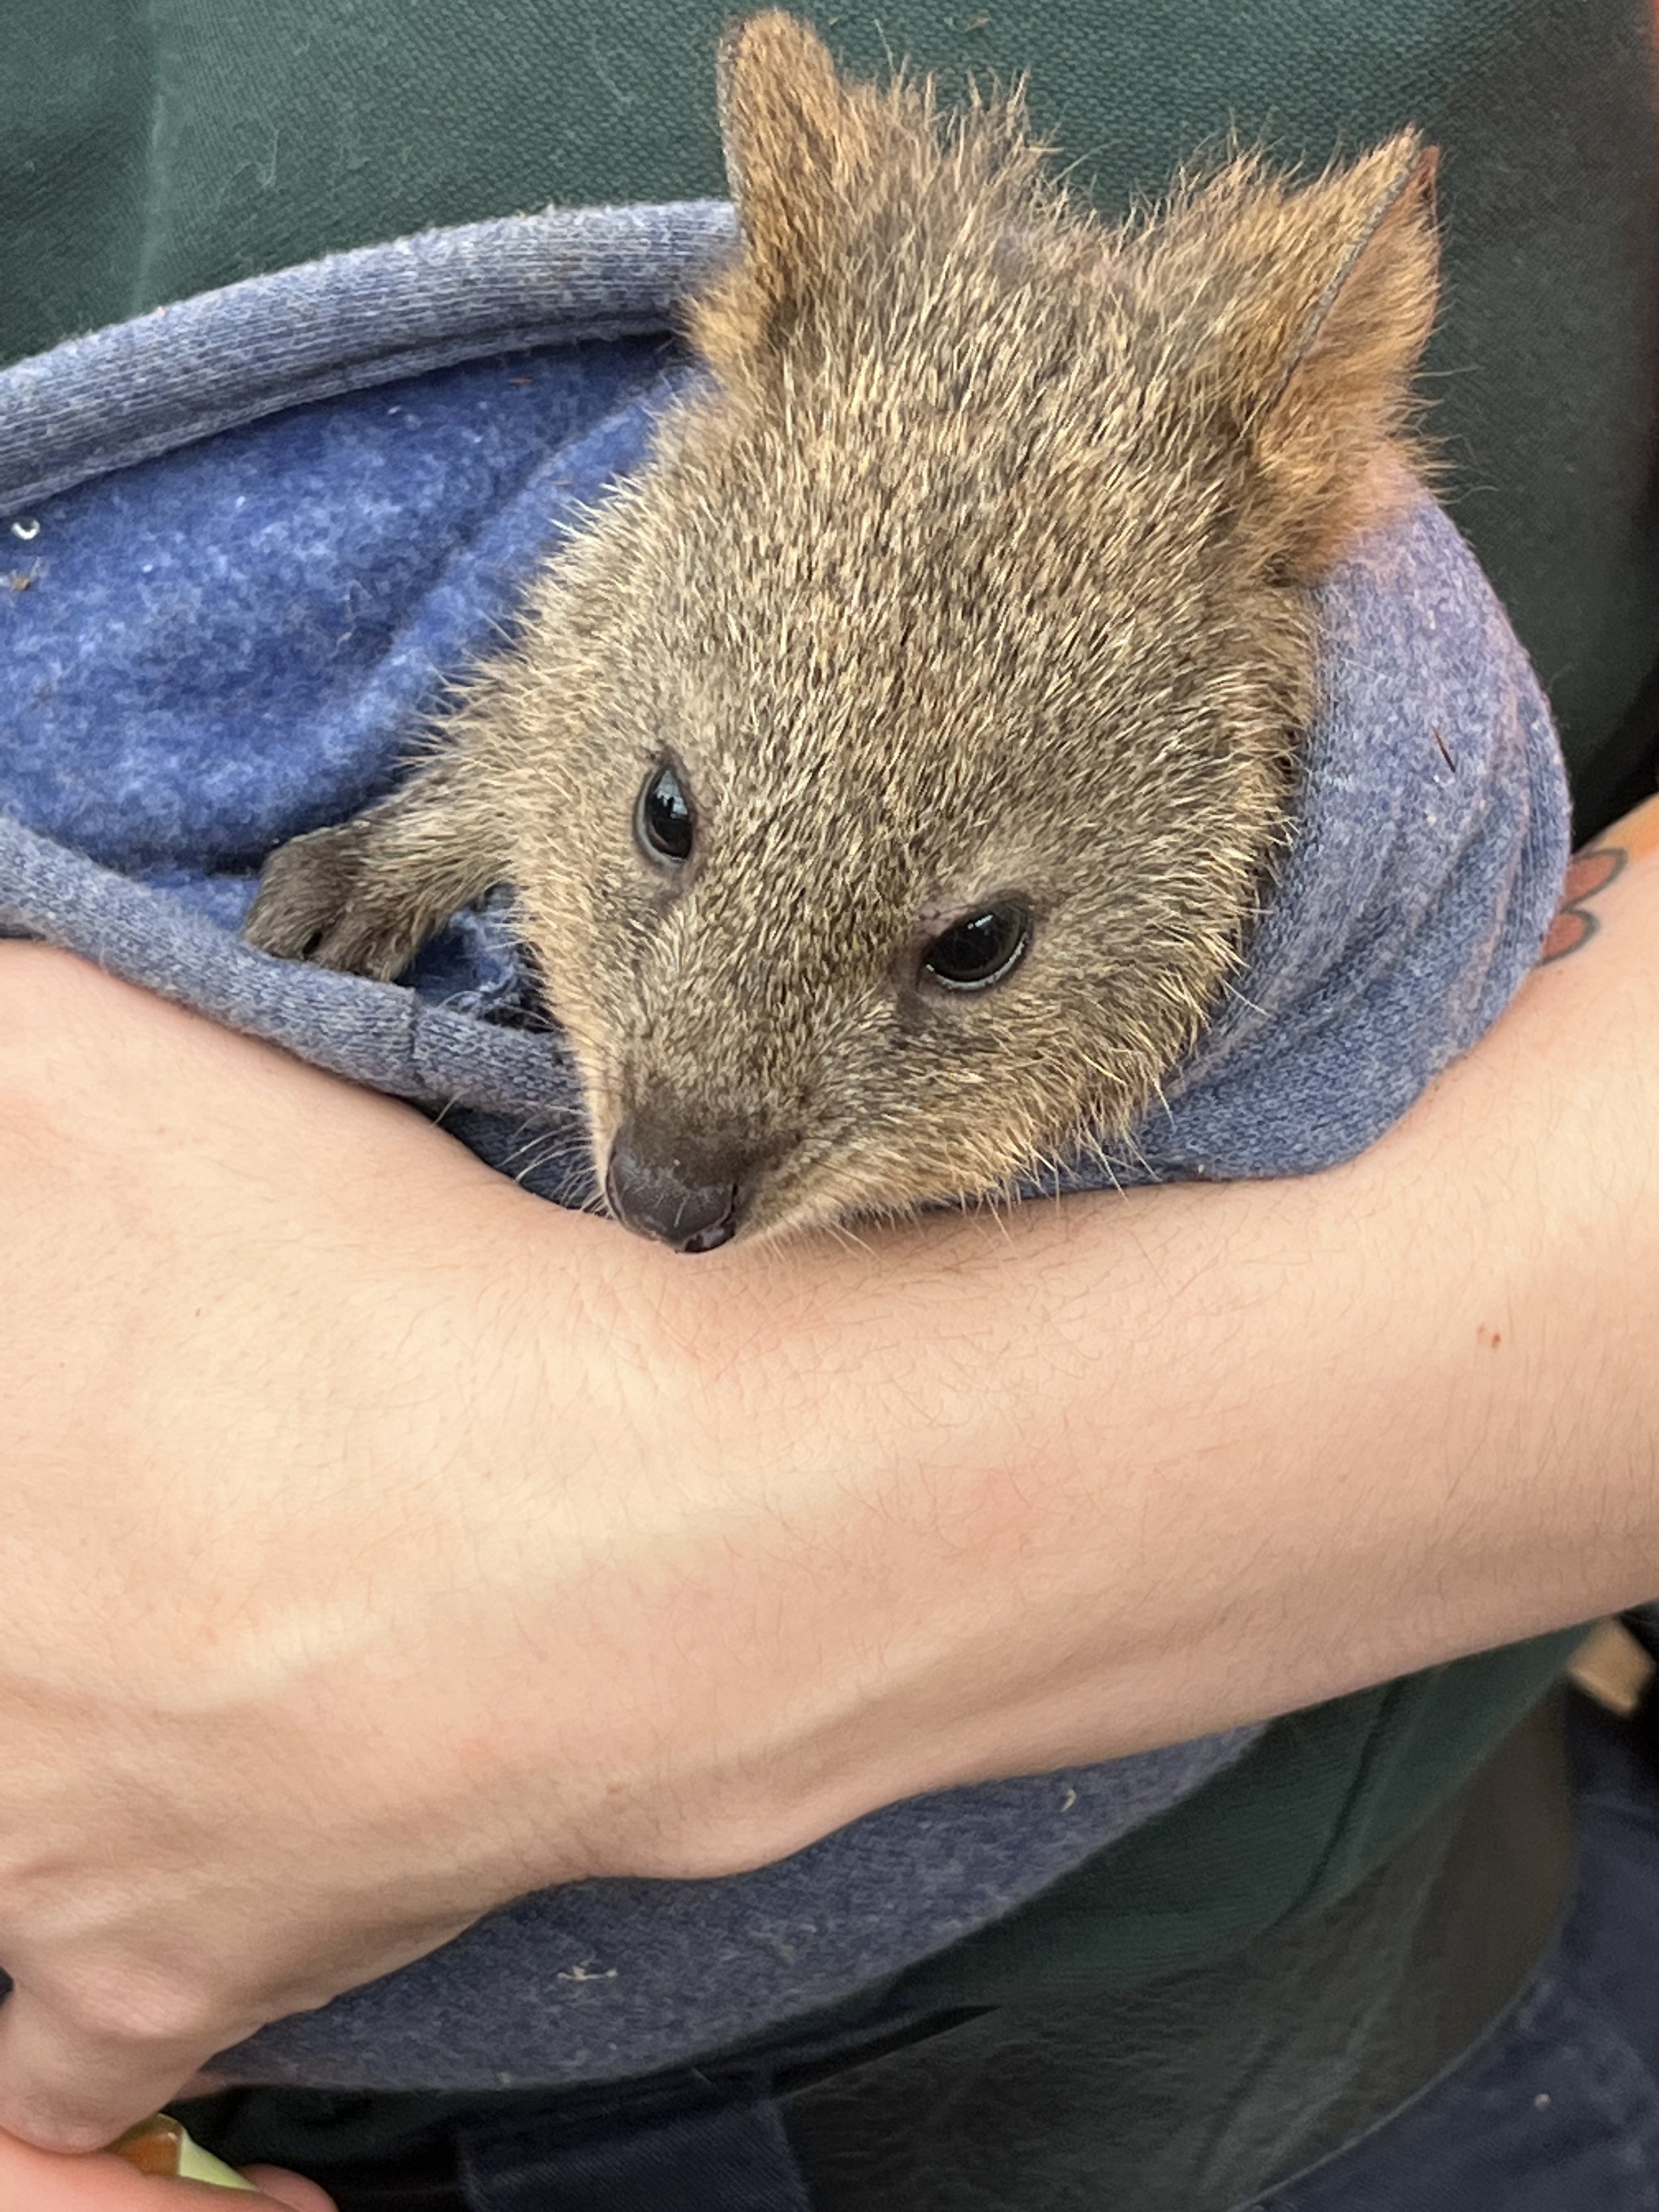 6-month old quokka. Many more of these later!